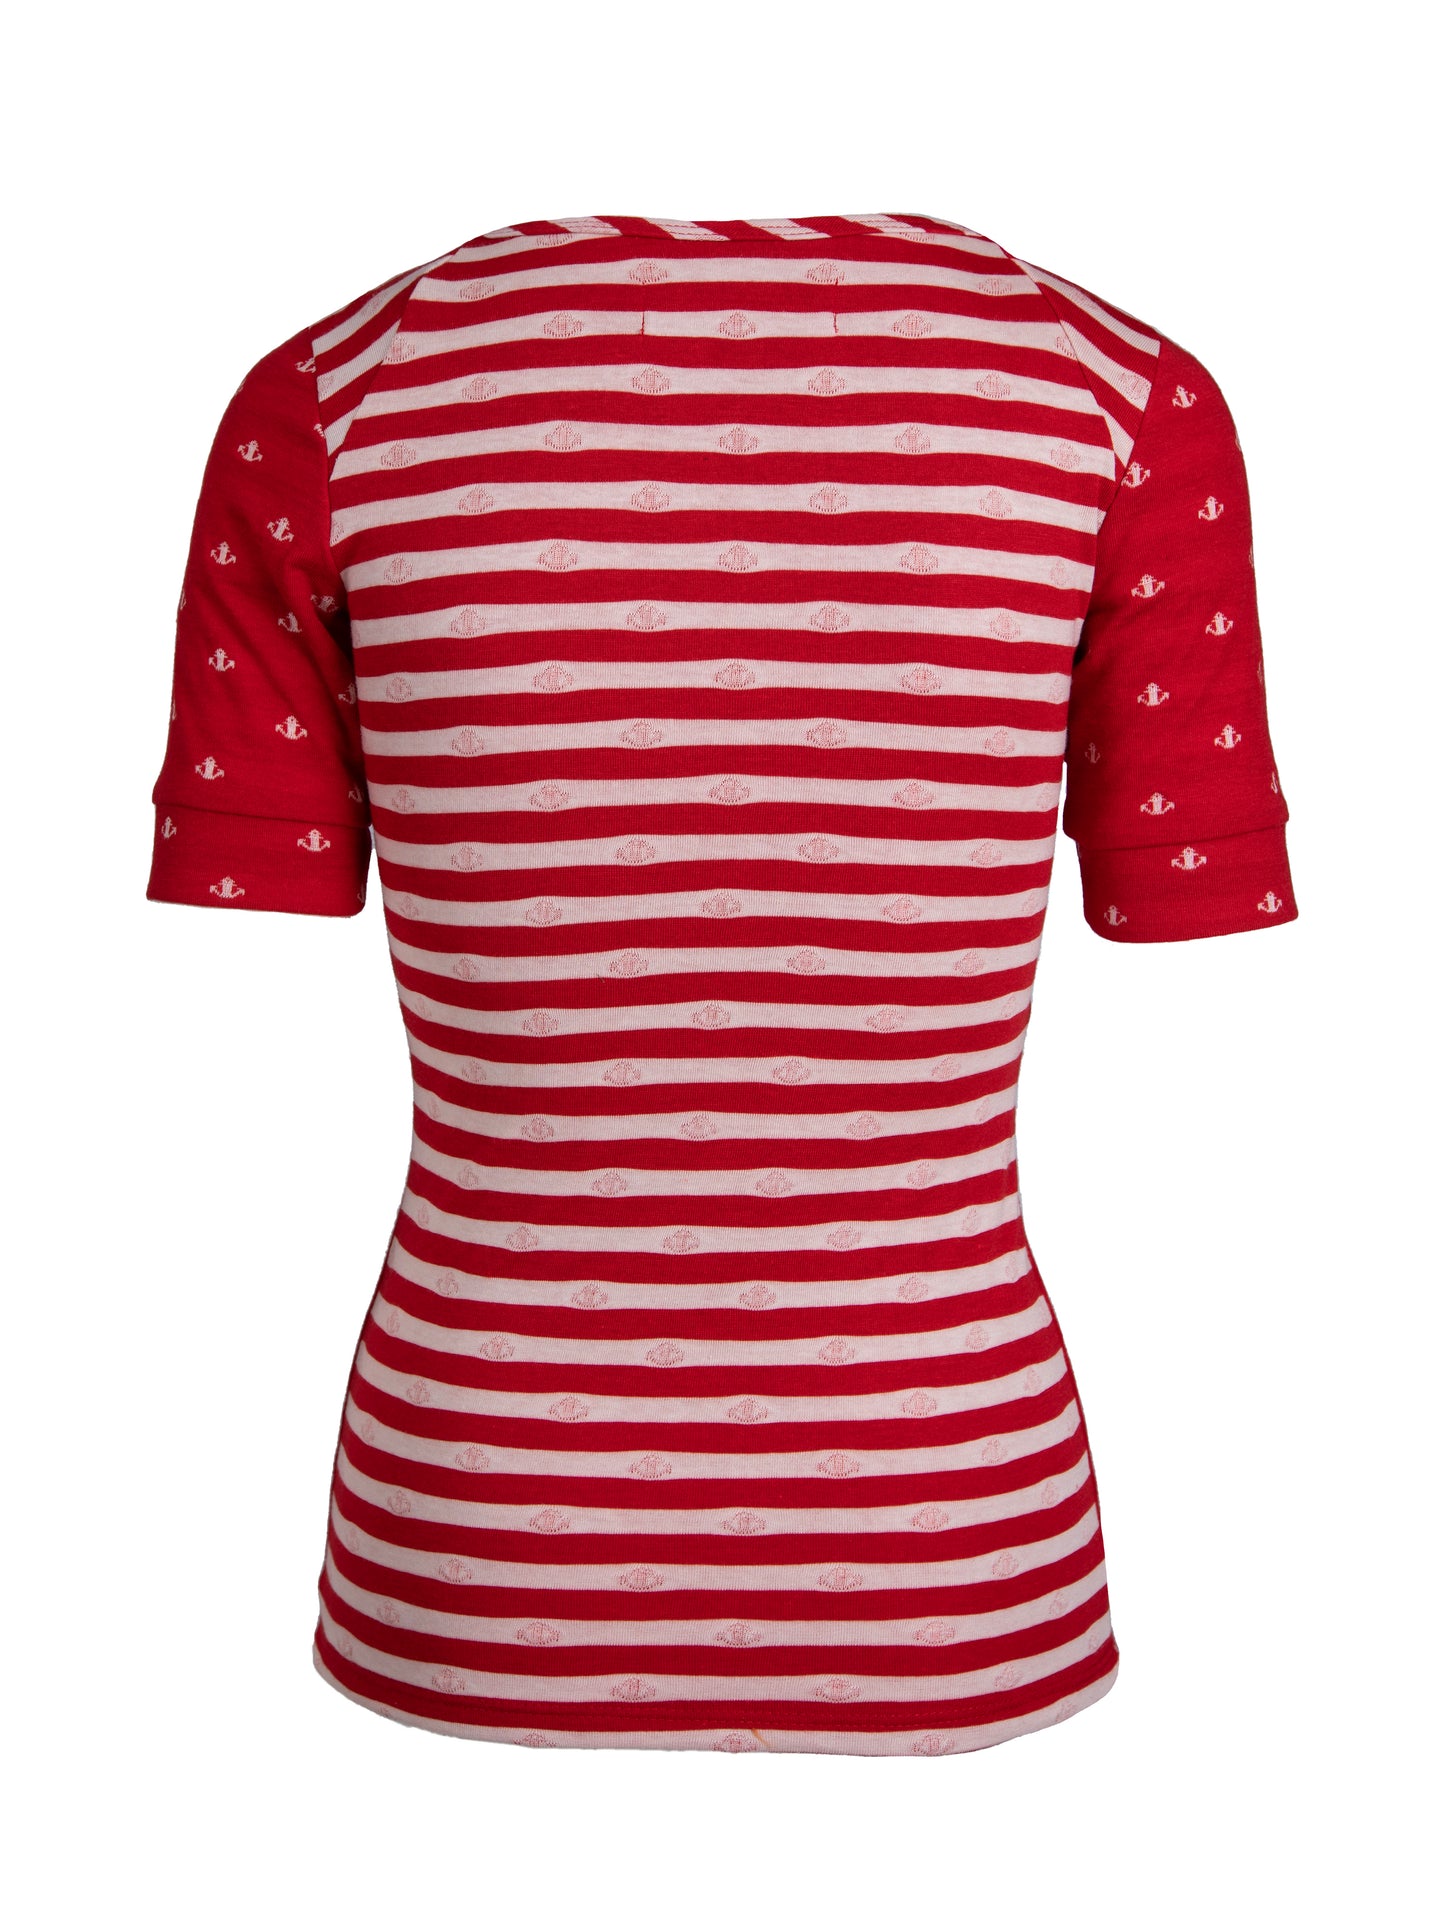 GUILLOTINE Anchor Stripe Fitted Tee